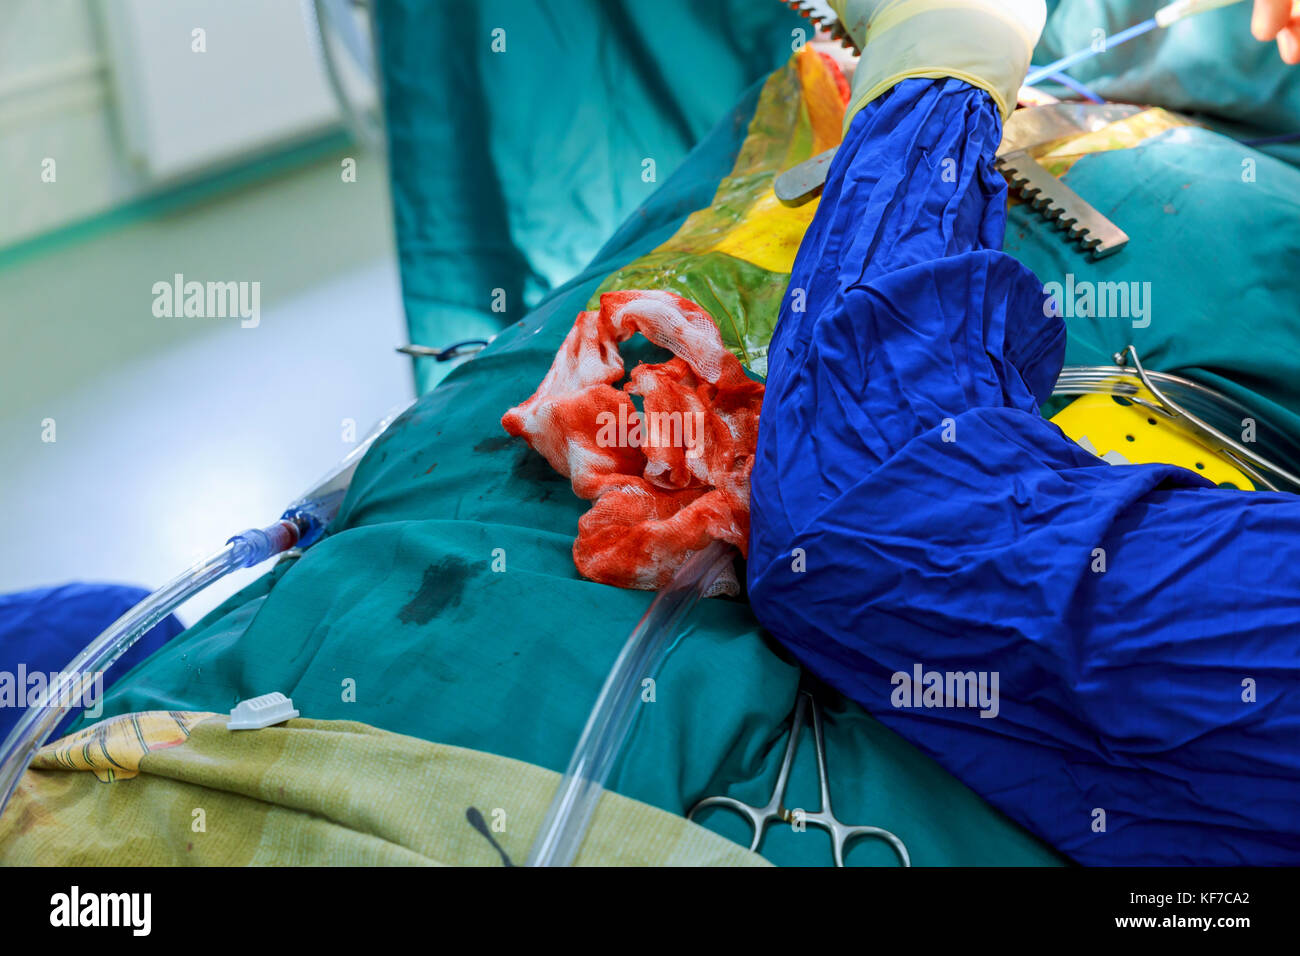 Surgeon doctor operating wearing special lamp lighting using electric cautery heart surgery intervention close-up, open cord surgery minimally invasiv Stock Photo